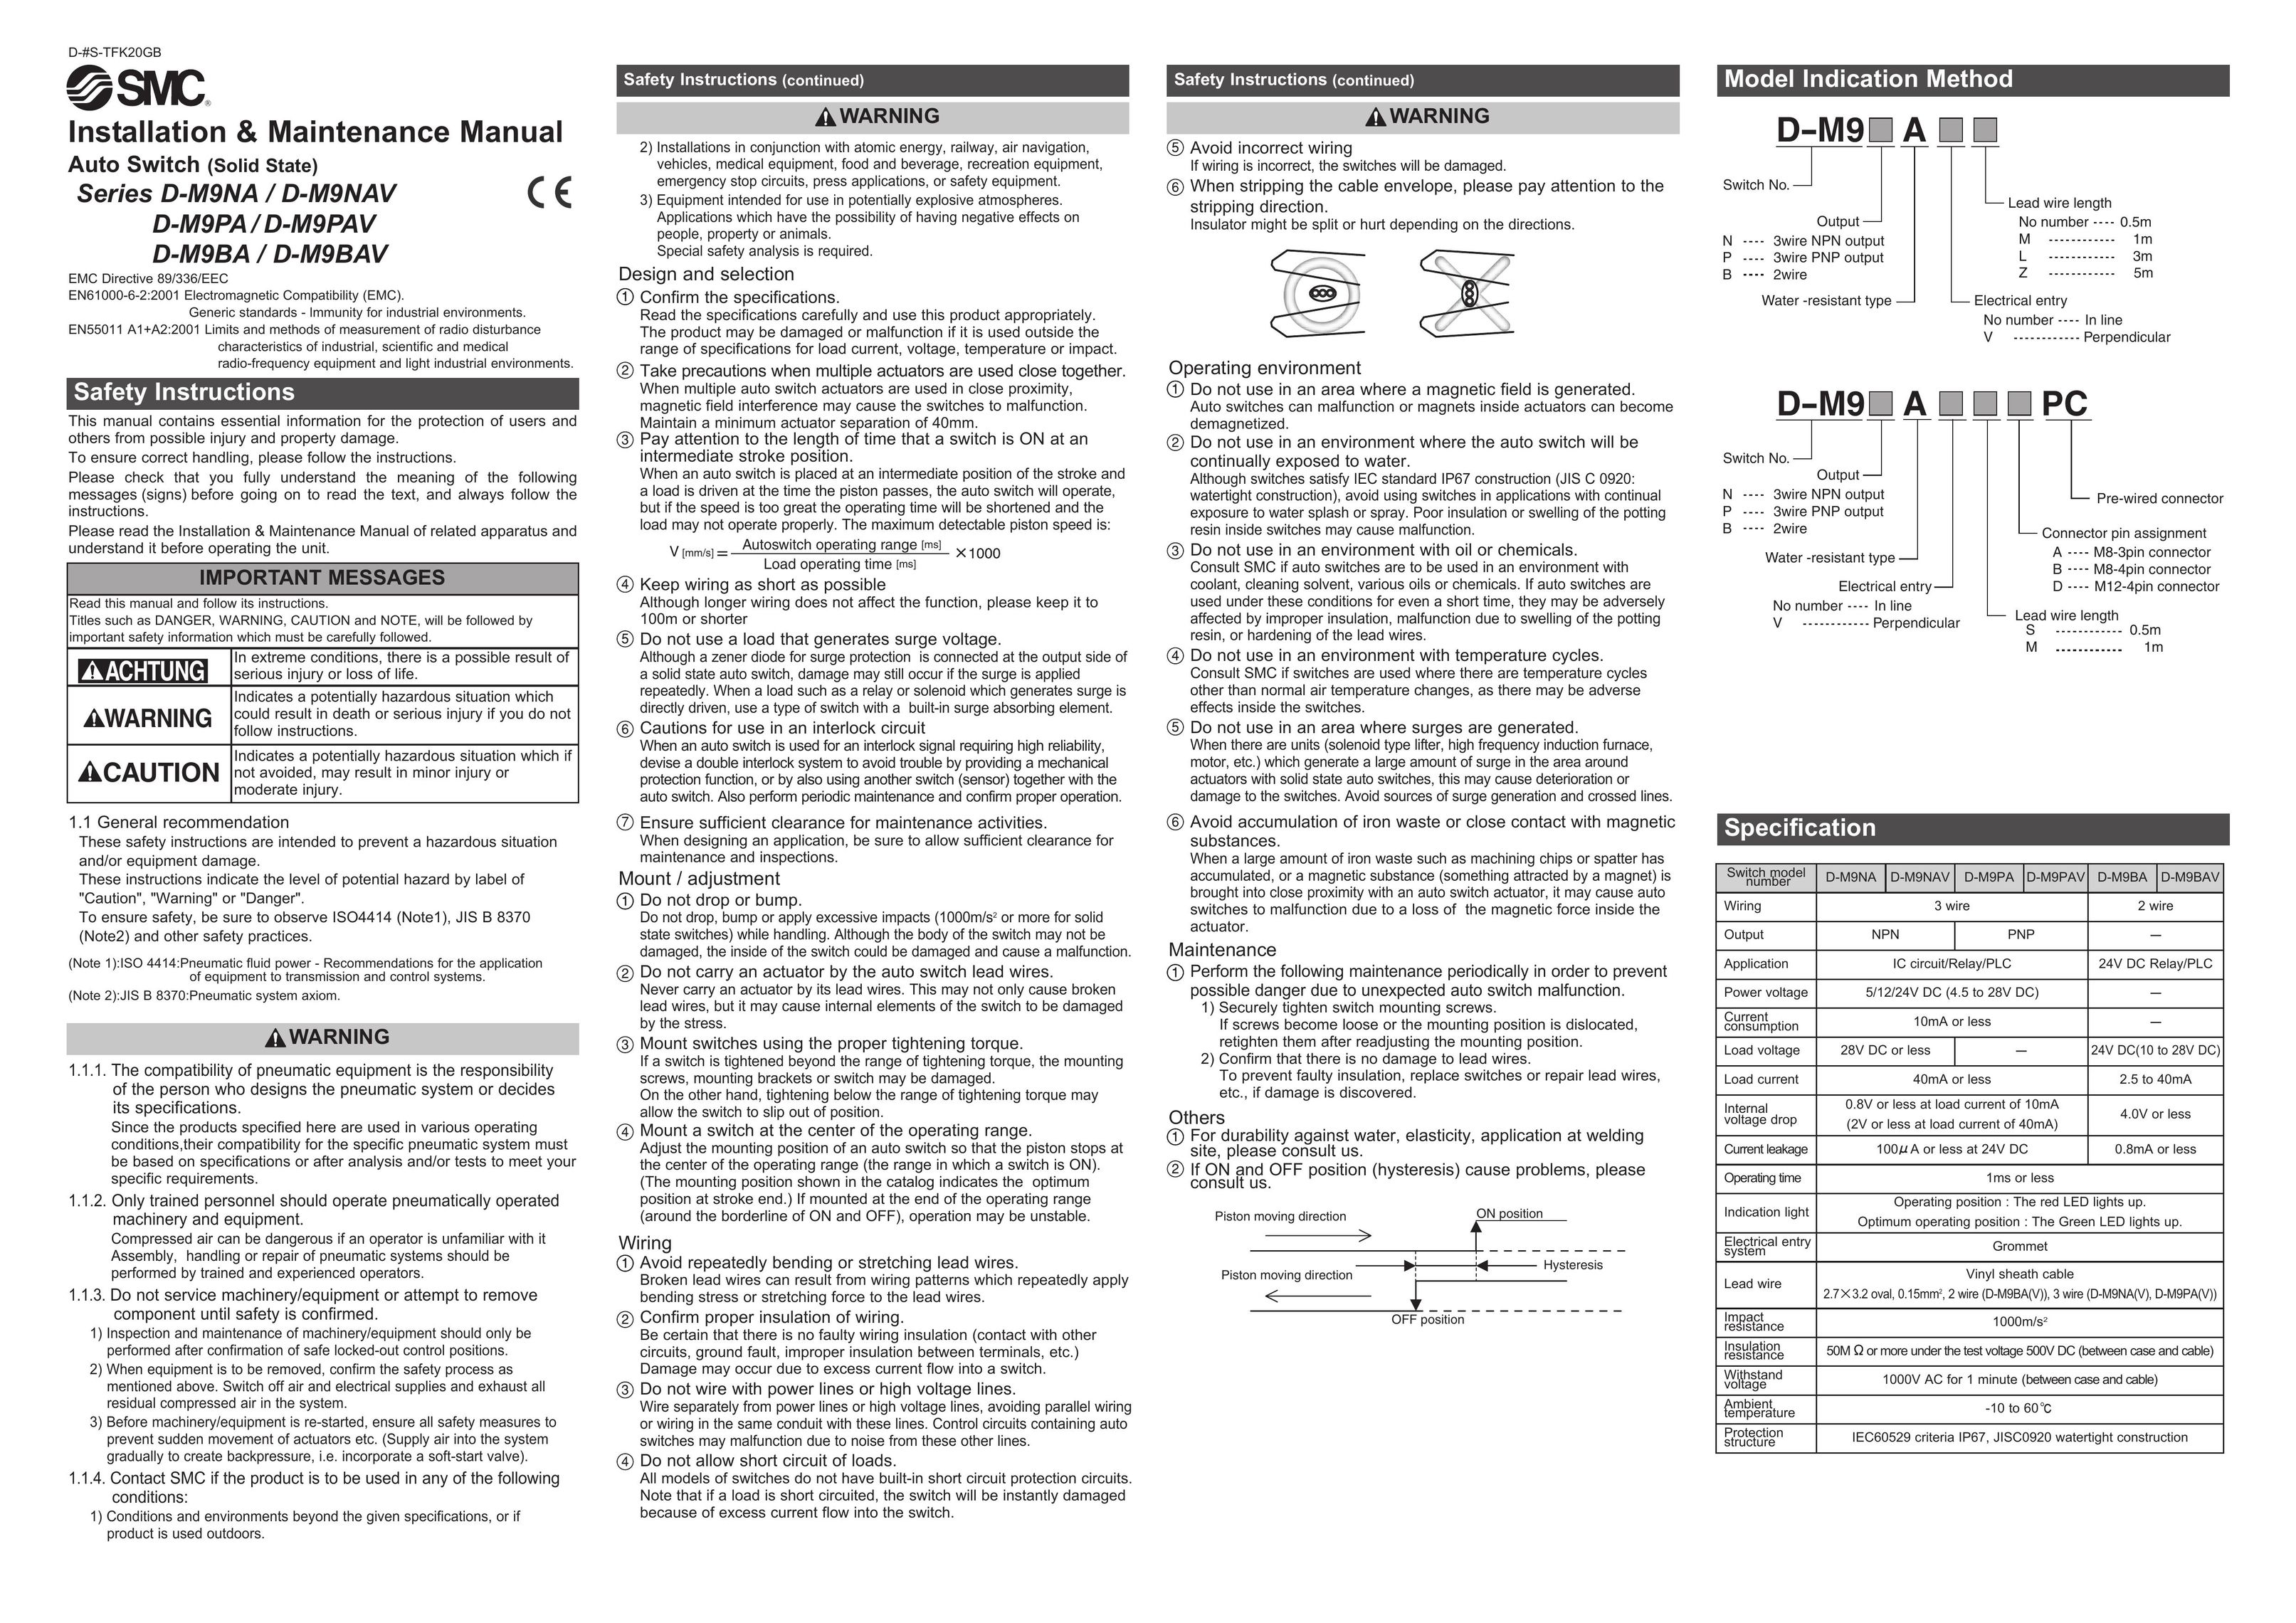 Sierra Monitor Corporation D-M9NA Switch User Manual